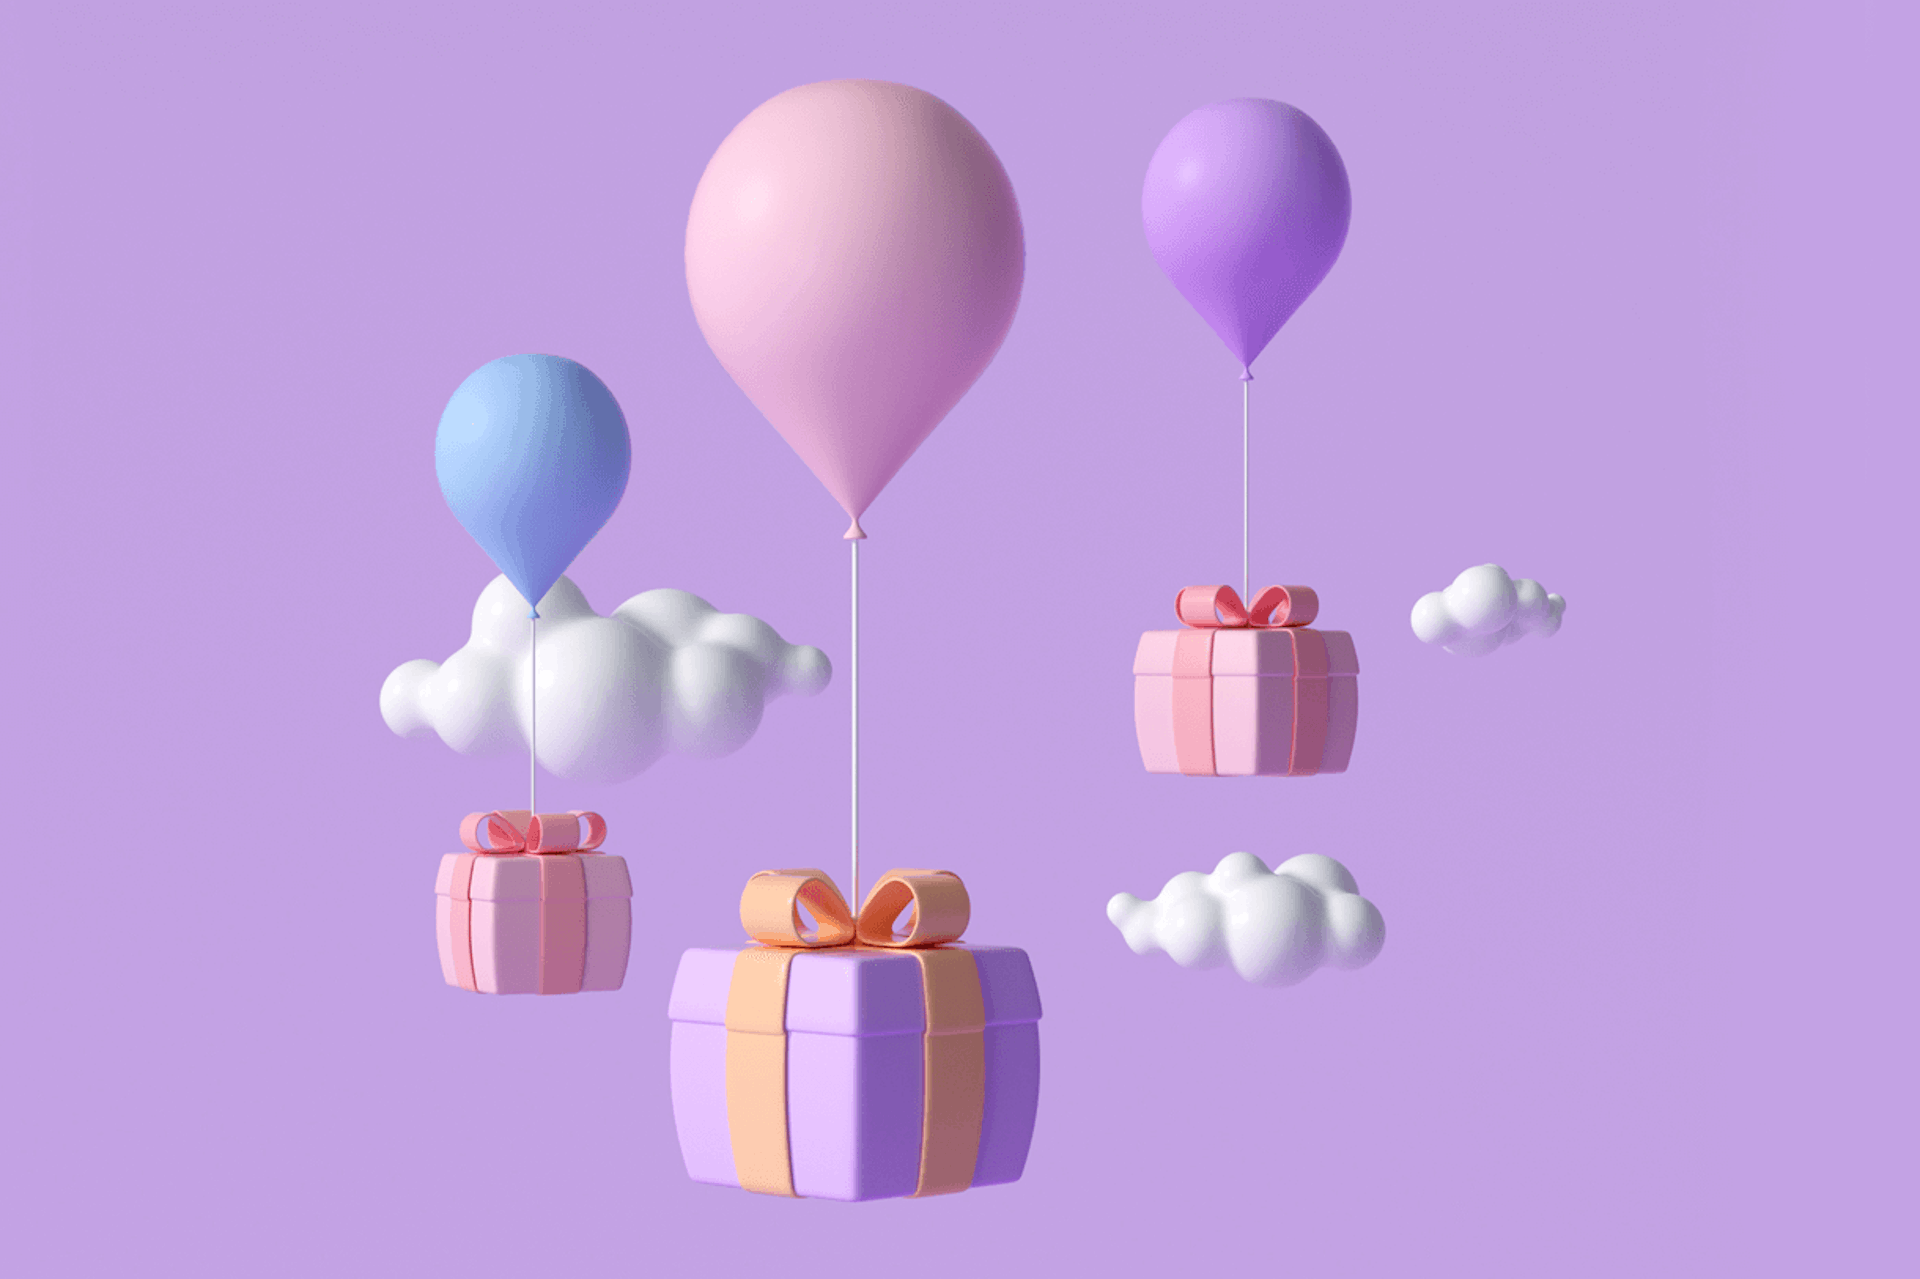 Illustration showing three different sized wrapped packages being held up by multi-colored balloons, surrounded by clouds, on a purple background. Influencer gifting blog post and guide.